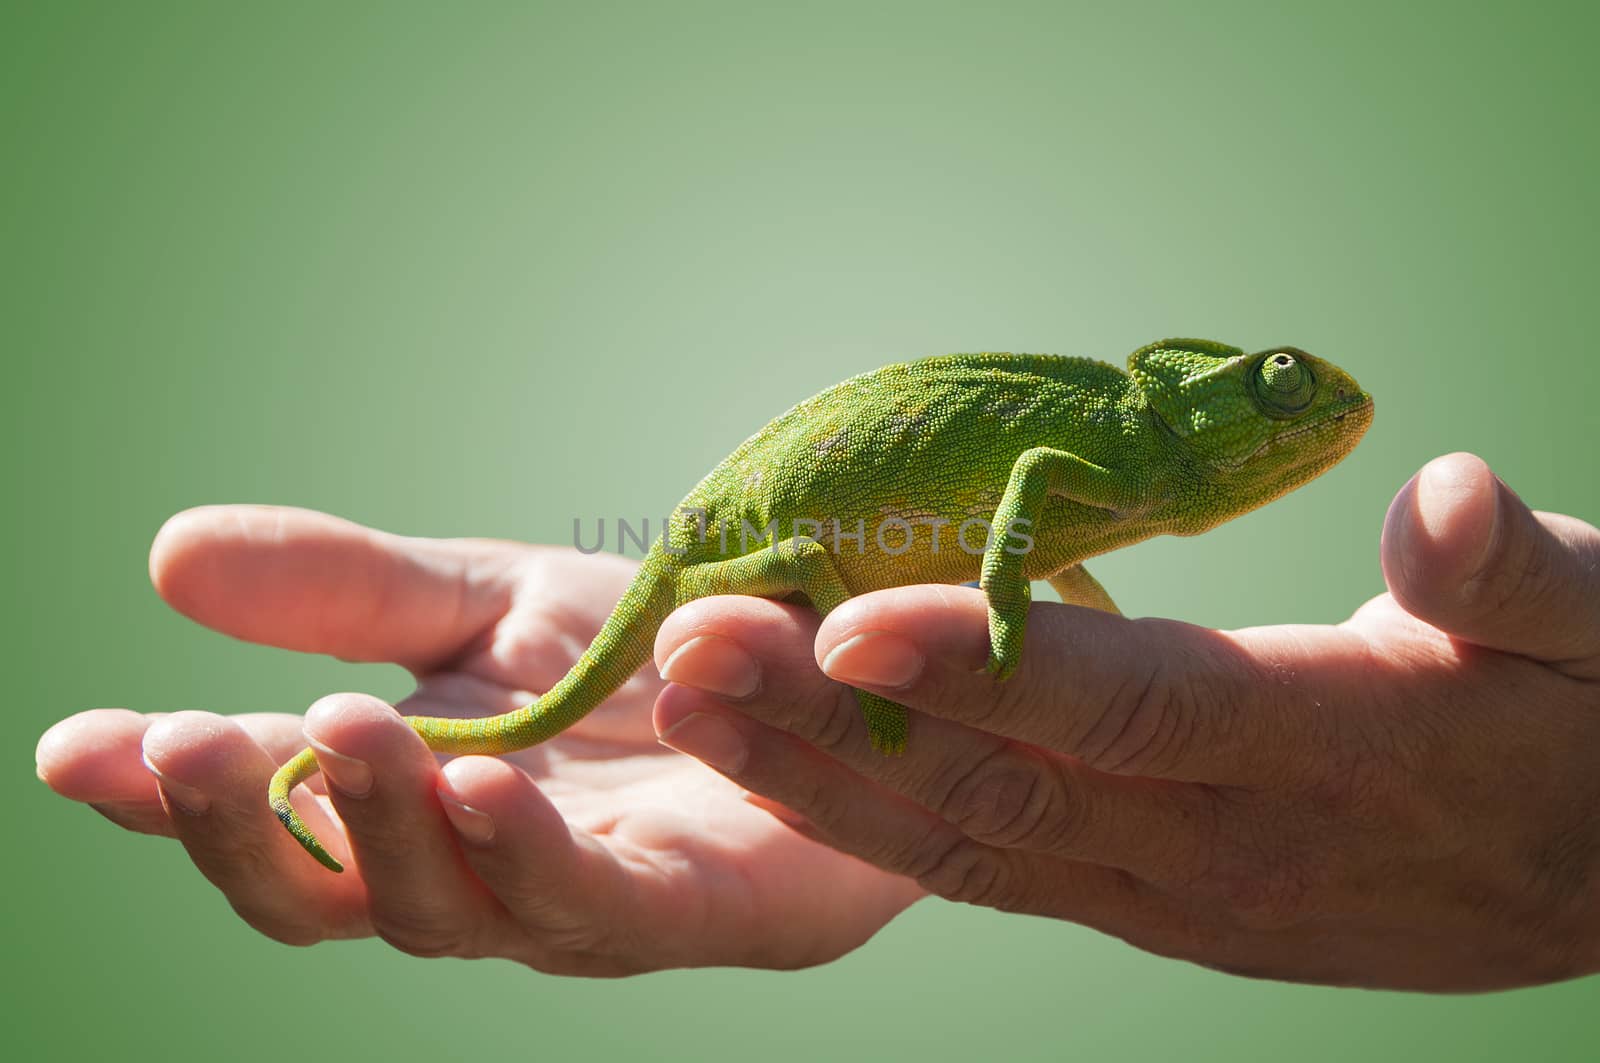 Chameleon in some hands by danielbarquero